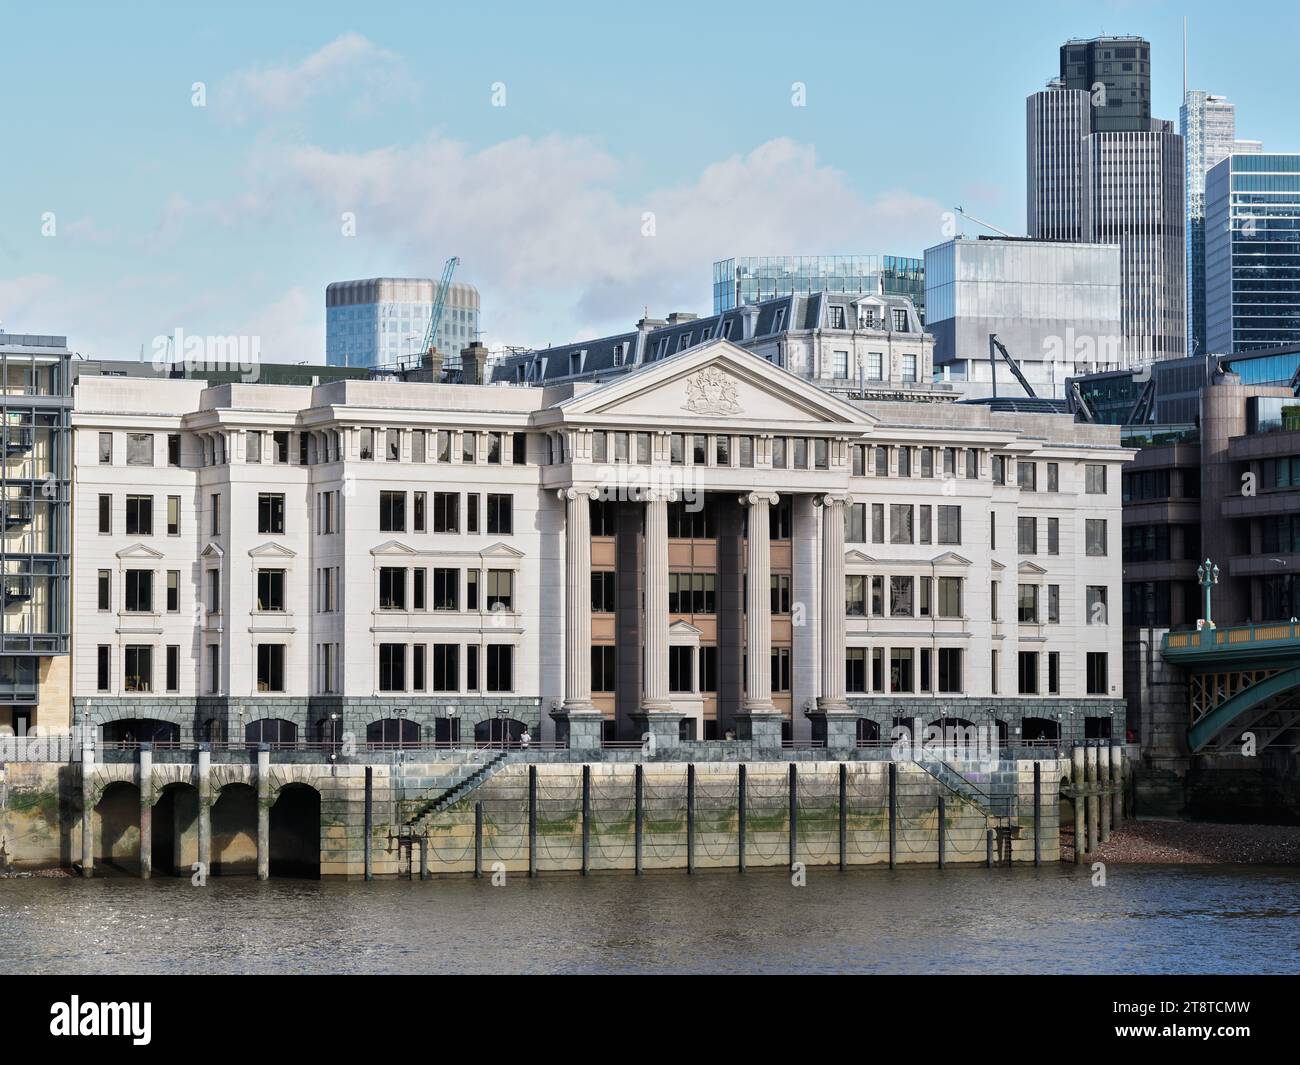 Vintner's Place, on a bank of the river Thames by Southwark bridge, London, England. Stock Photo